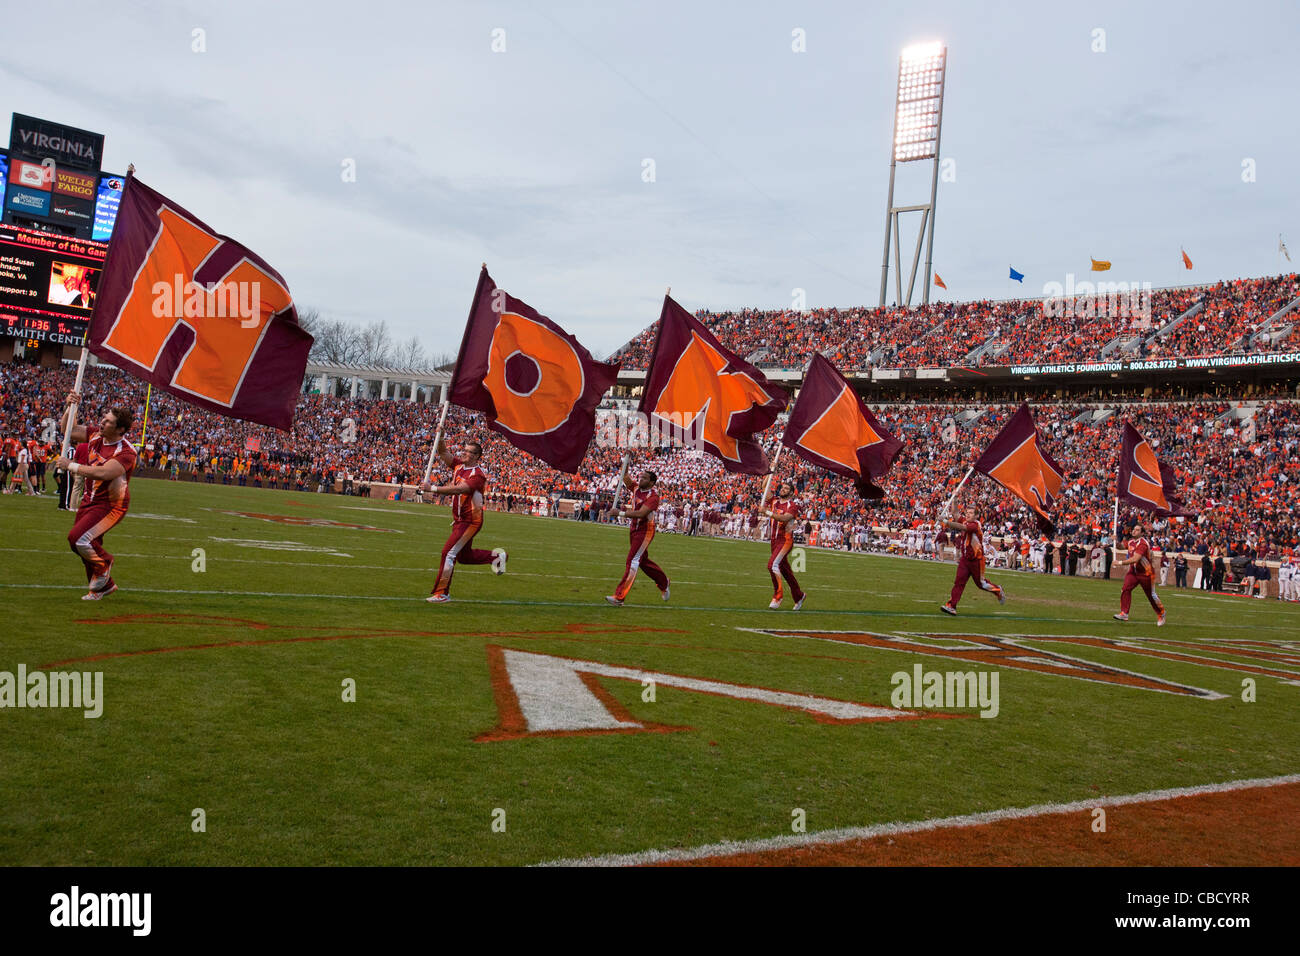 Virginia Tech Hokies cheerleaders celebrate a touchdown against the Virginia Cavaliers during the second quarter at Scott Stadium, Charlottesville, Virginia, United States of America Stock Photo